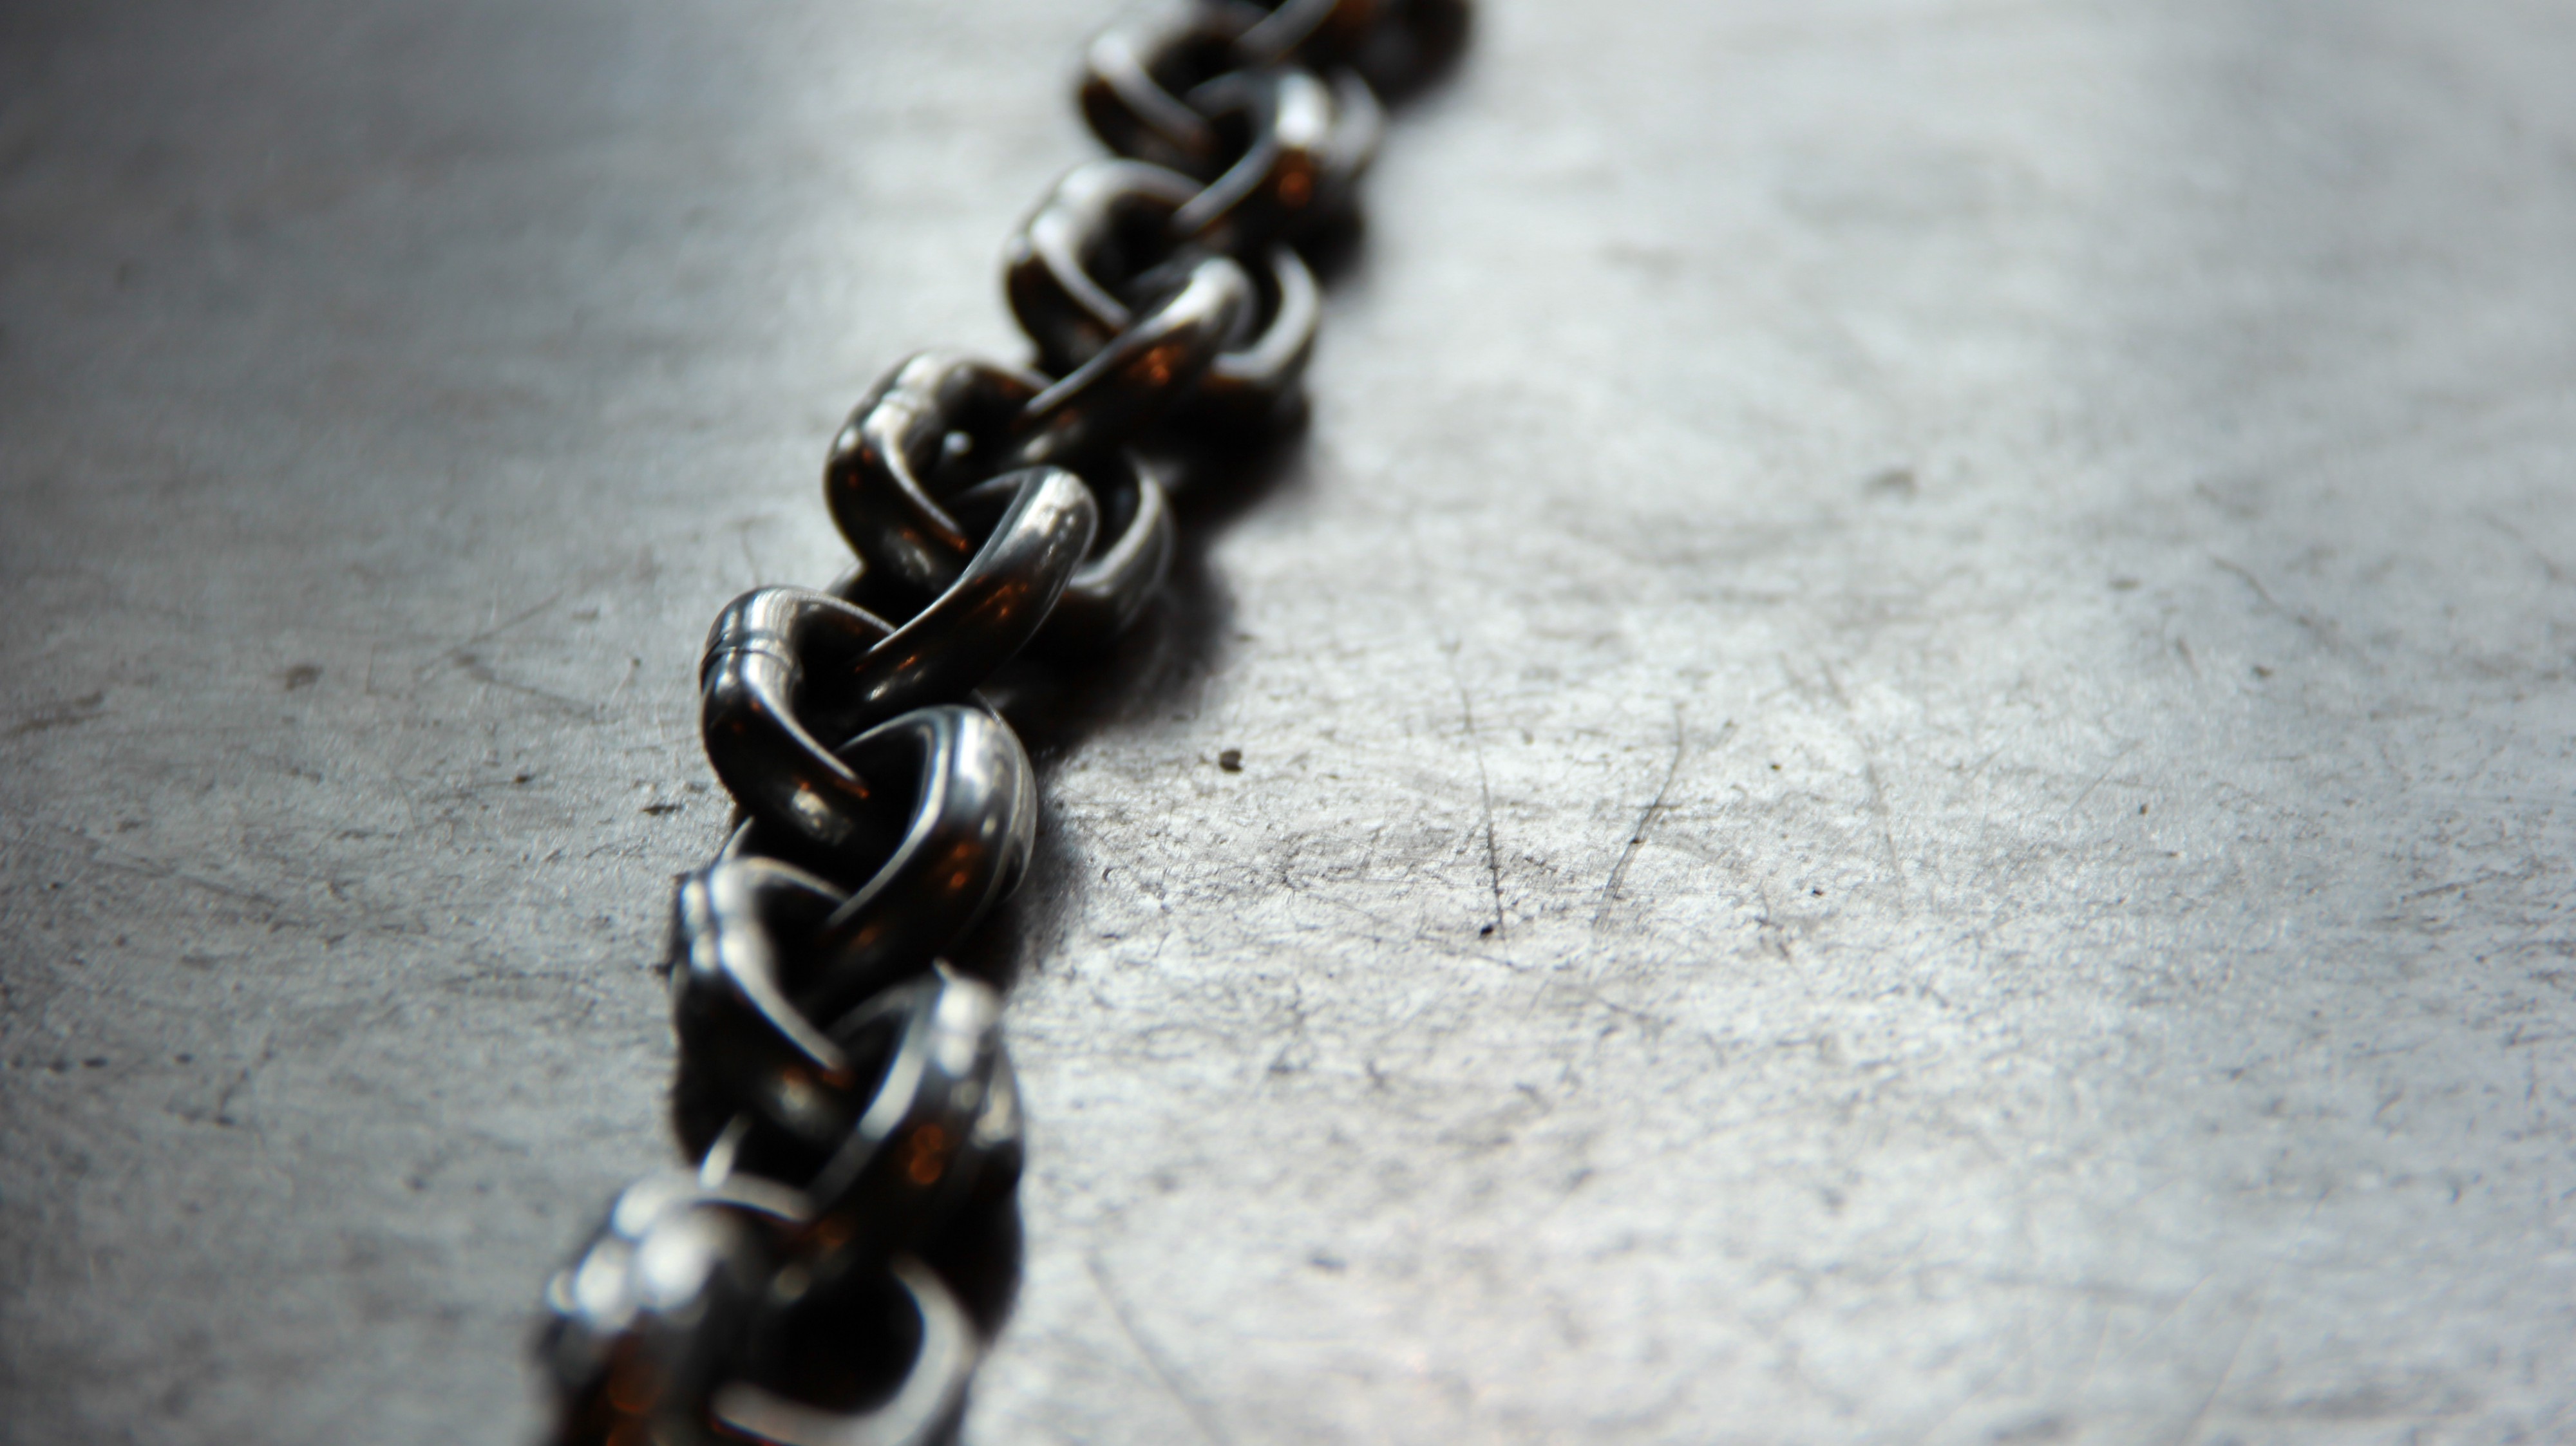 Chain by Kaley Dykstra from Unsplash